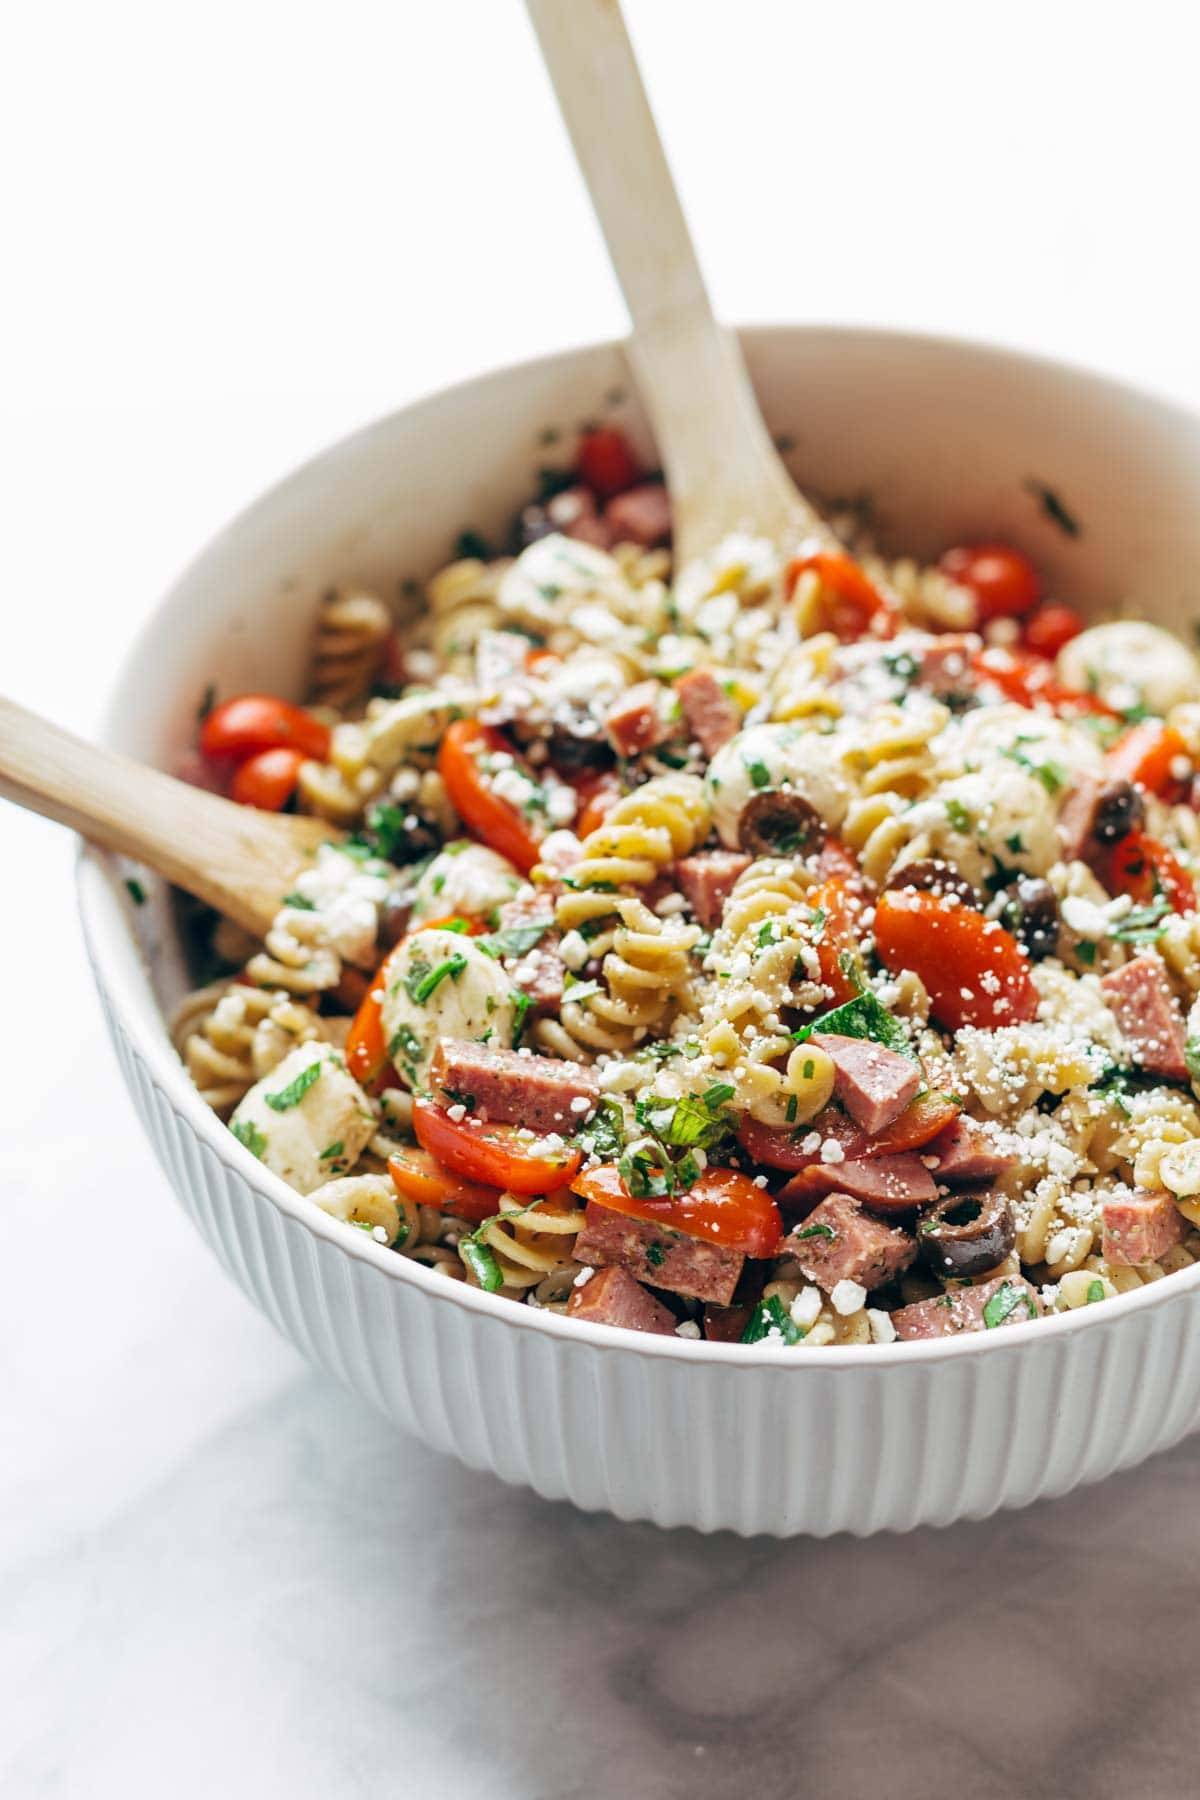 Best Easy Italian Pasta Salad - with pasta, tomatoes, fresh mozzarella, spicy salami, parsley, olives, and easy Italian dressing. Super versatile to what you have on hand! | pinchofyum.comc